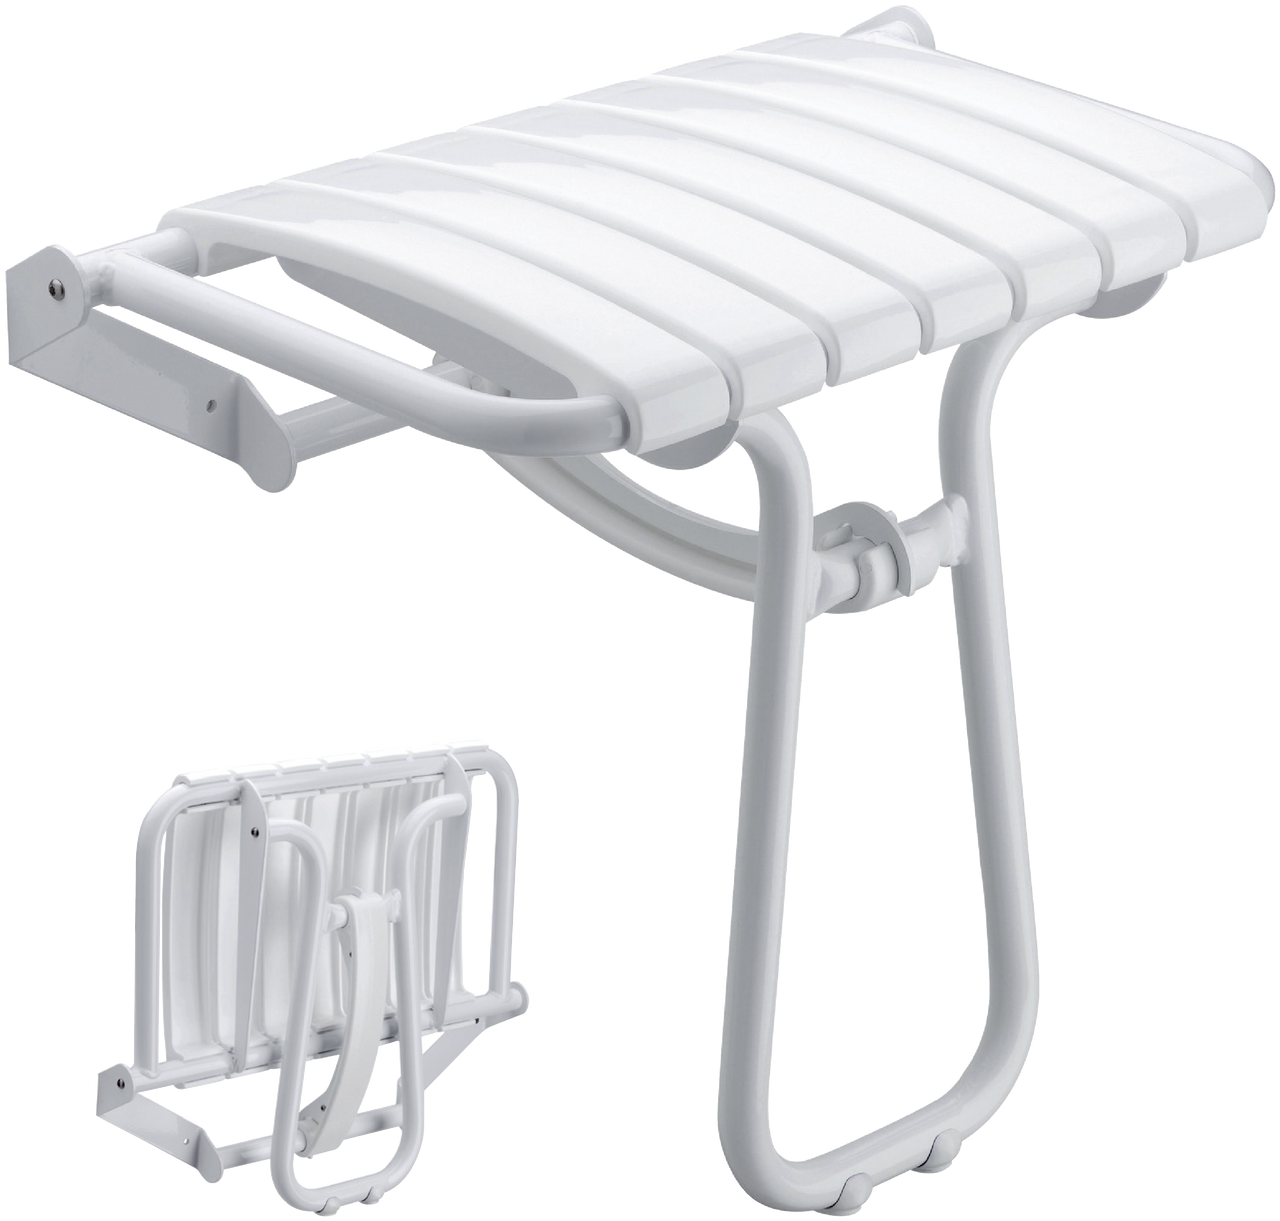 23" Eleganto White Foldaway Wall Mount handicap Shower Seat with Integrated Support Stand